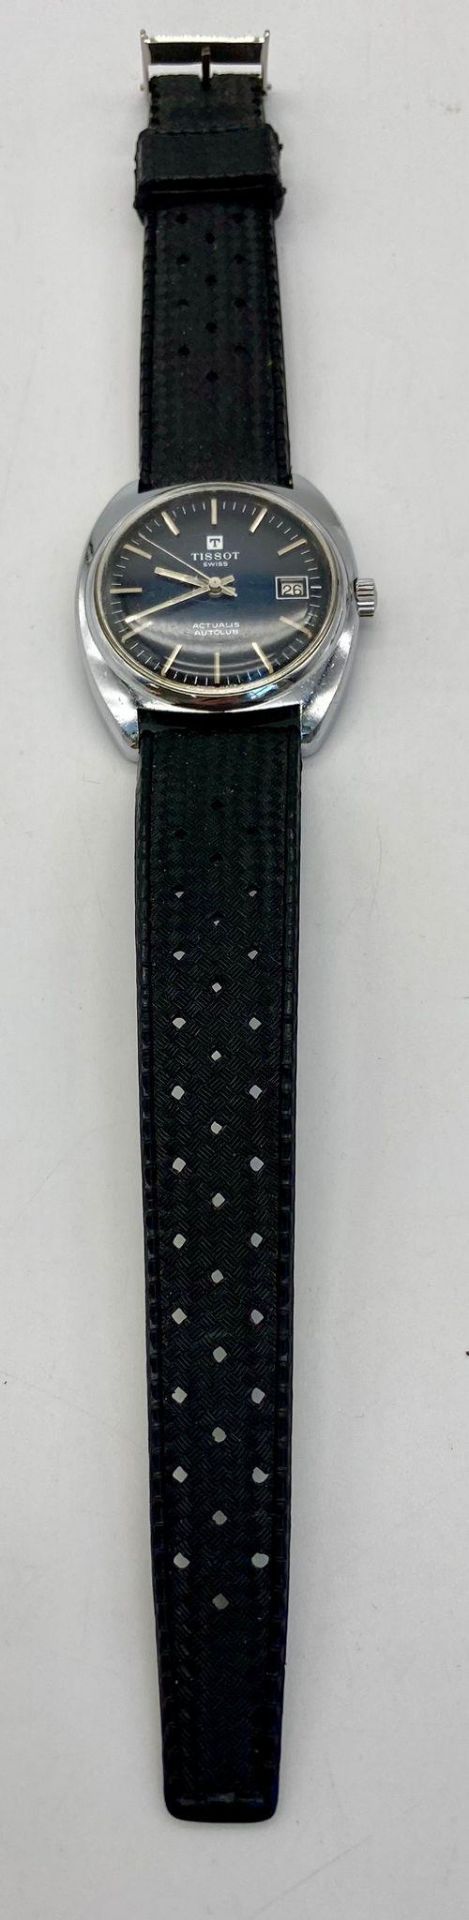 A Vintage Tissot Actualis Autolub Mechanical Gents Watch. Textured synthetic strap. Stainless - Image 2 of 4